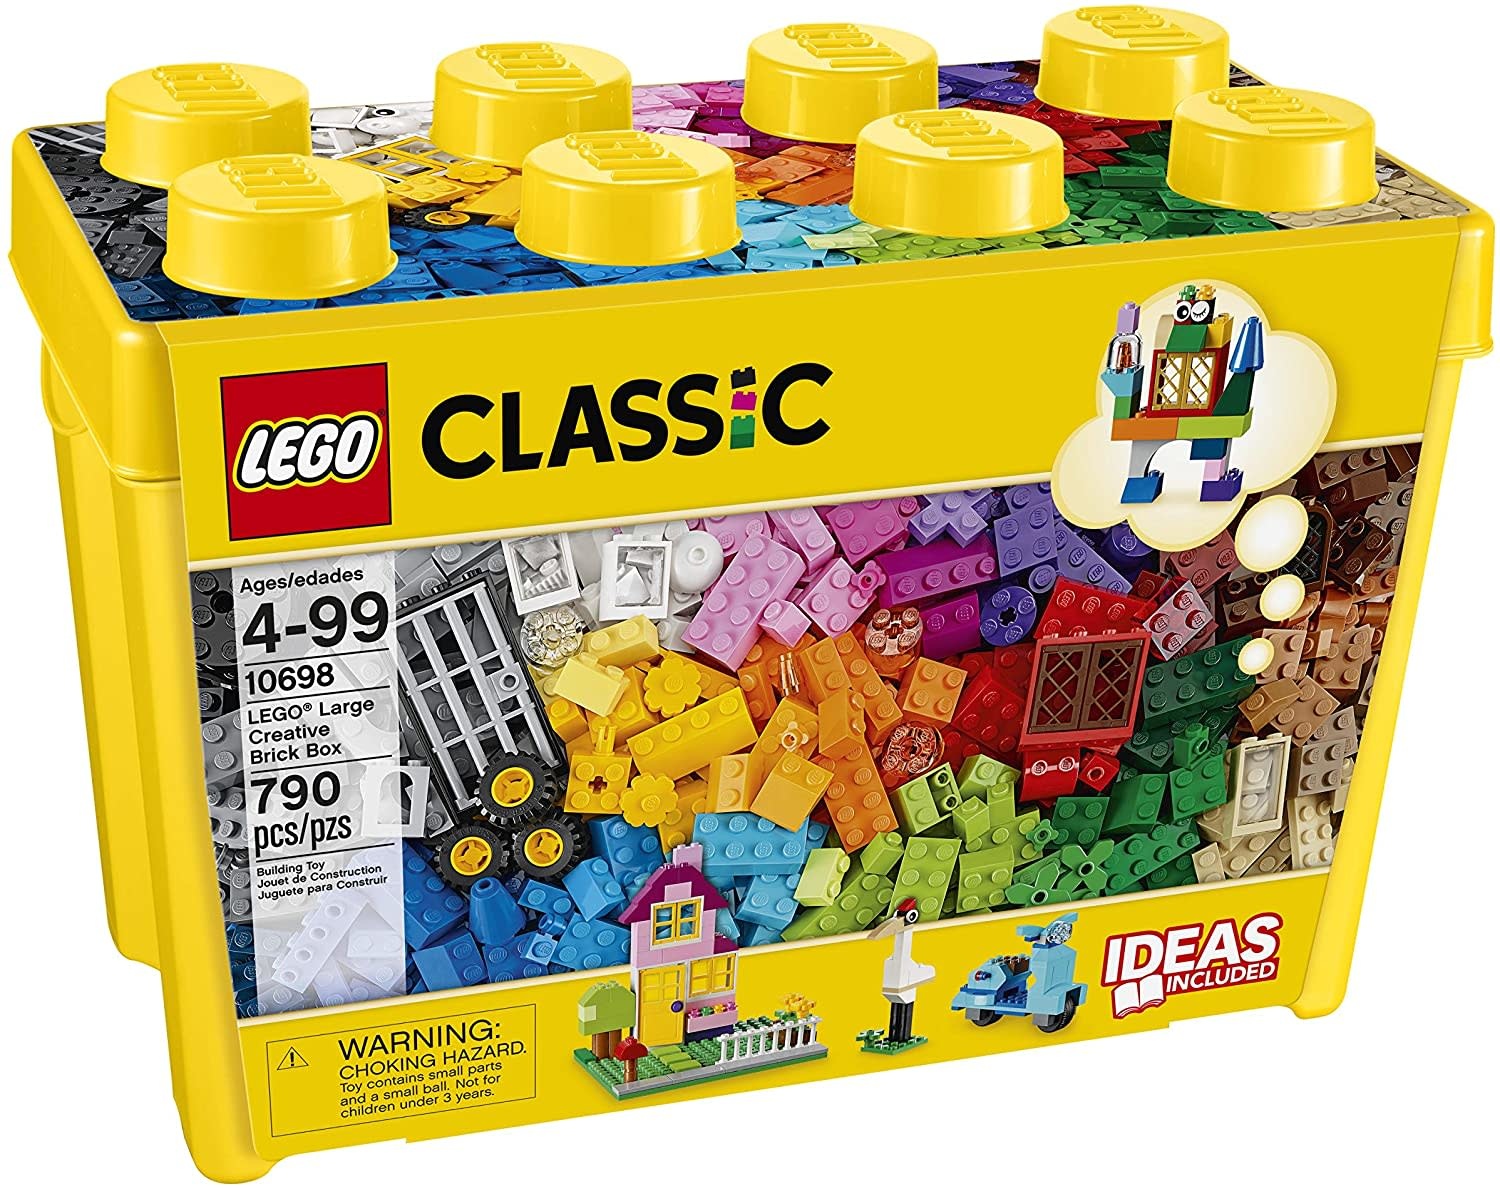 LEGO Classic LEGO Classic Large Creative Brick Box - Build Your Own Creative Toys - Kids Building Kit (790 Pieces)